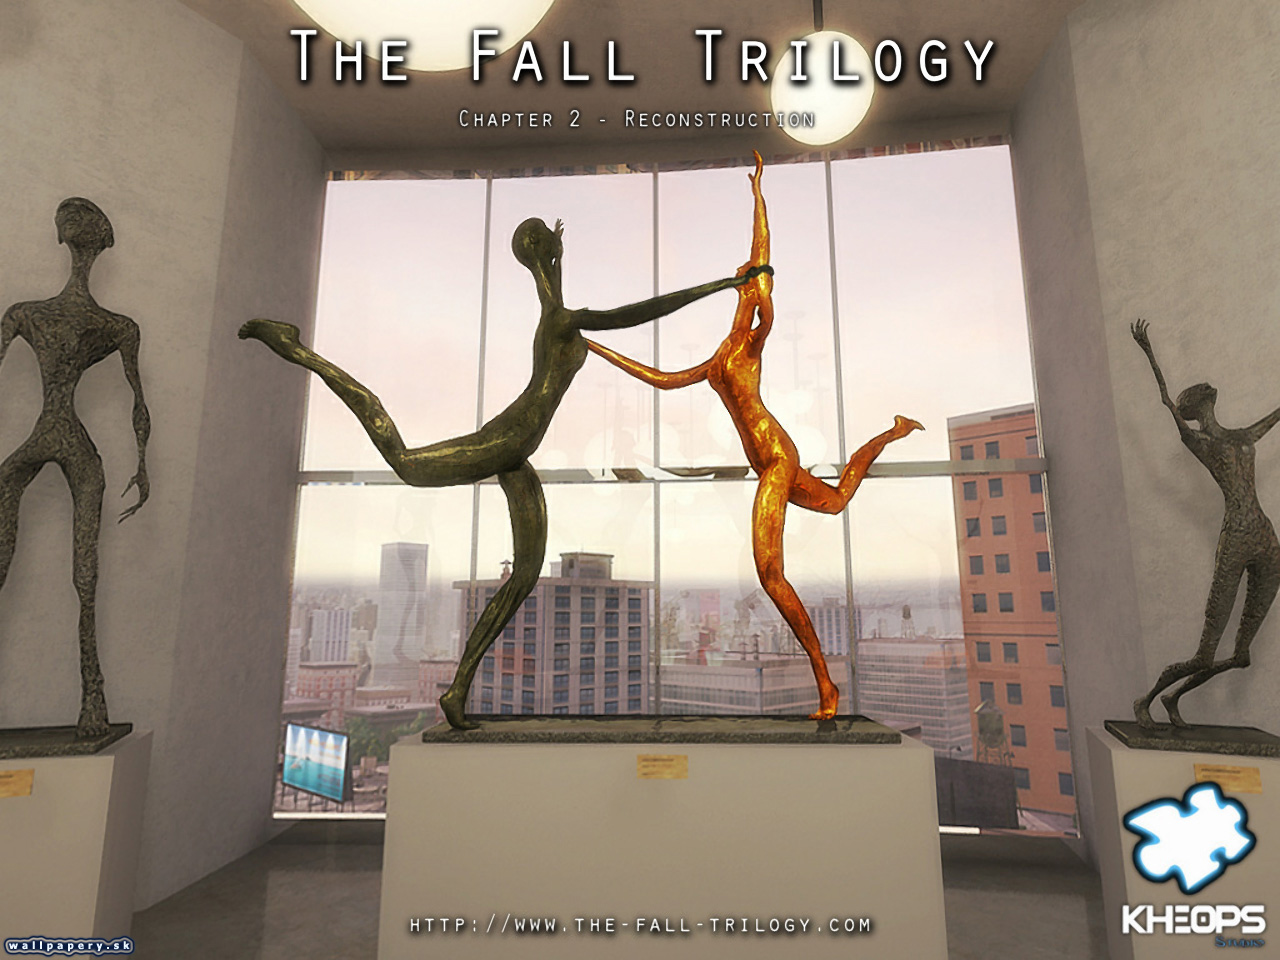 The Fall Trilogy - Chapter 2: Reconstruction - wallpaper 12